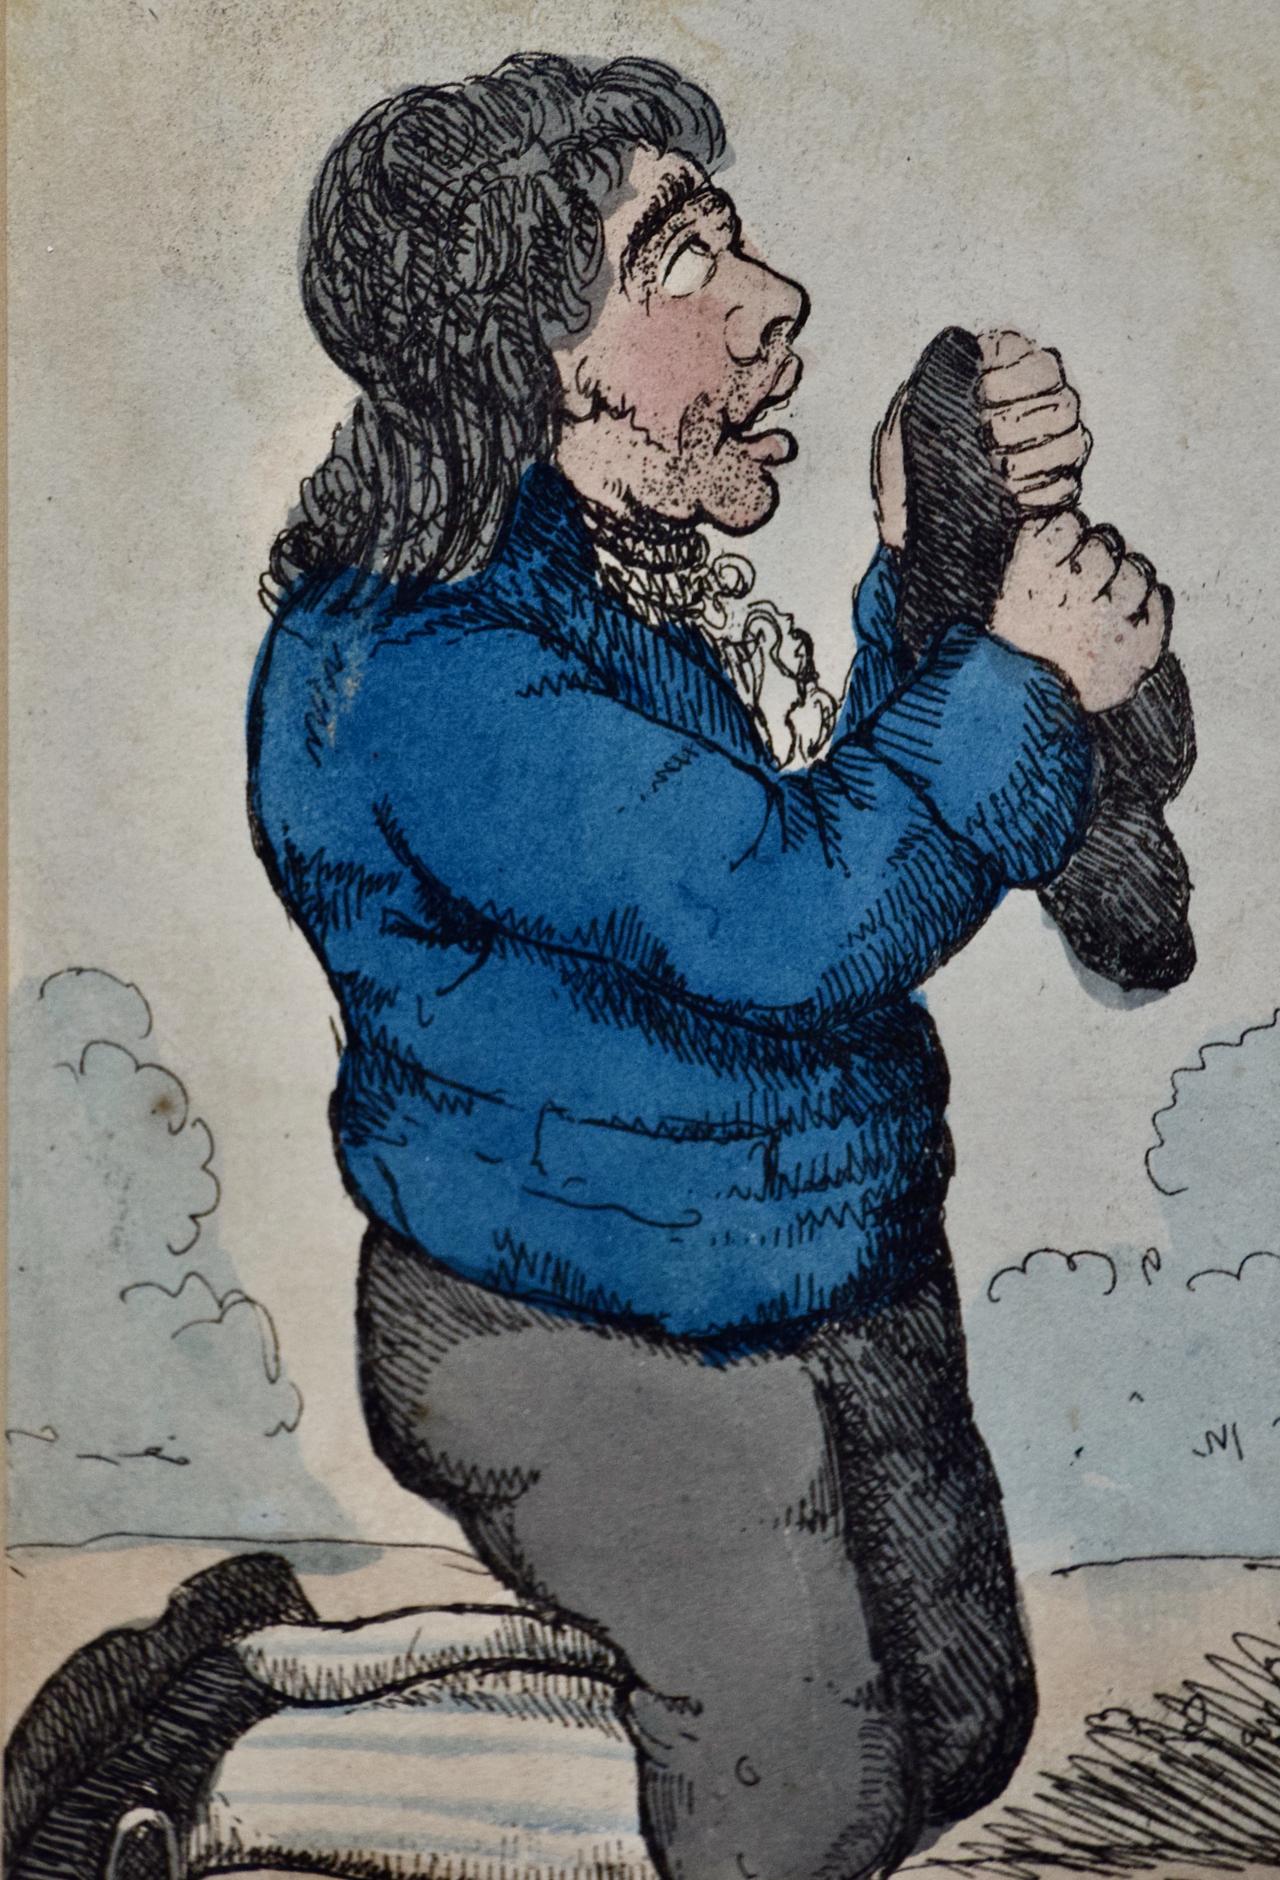 in what medium did satirical artist honore daumier create most of his works